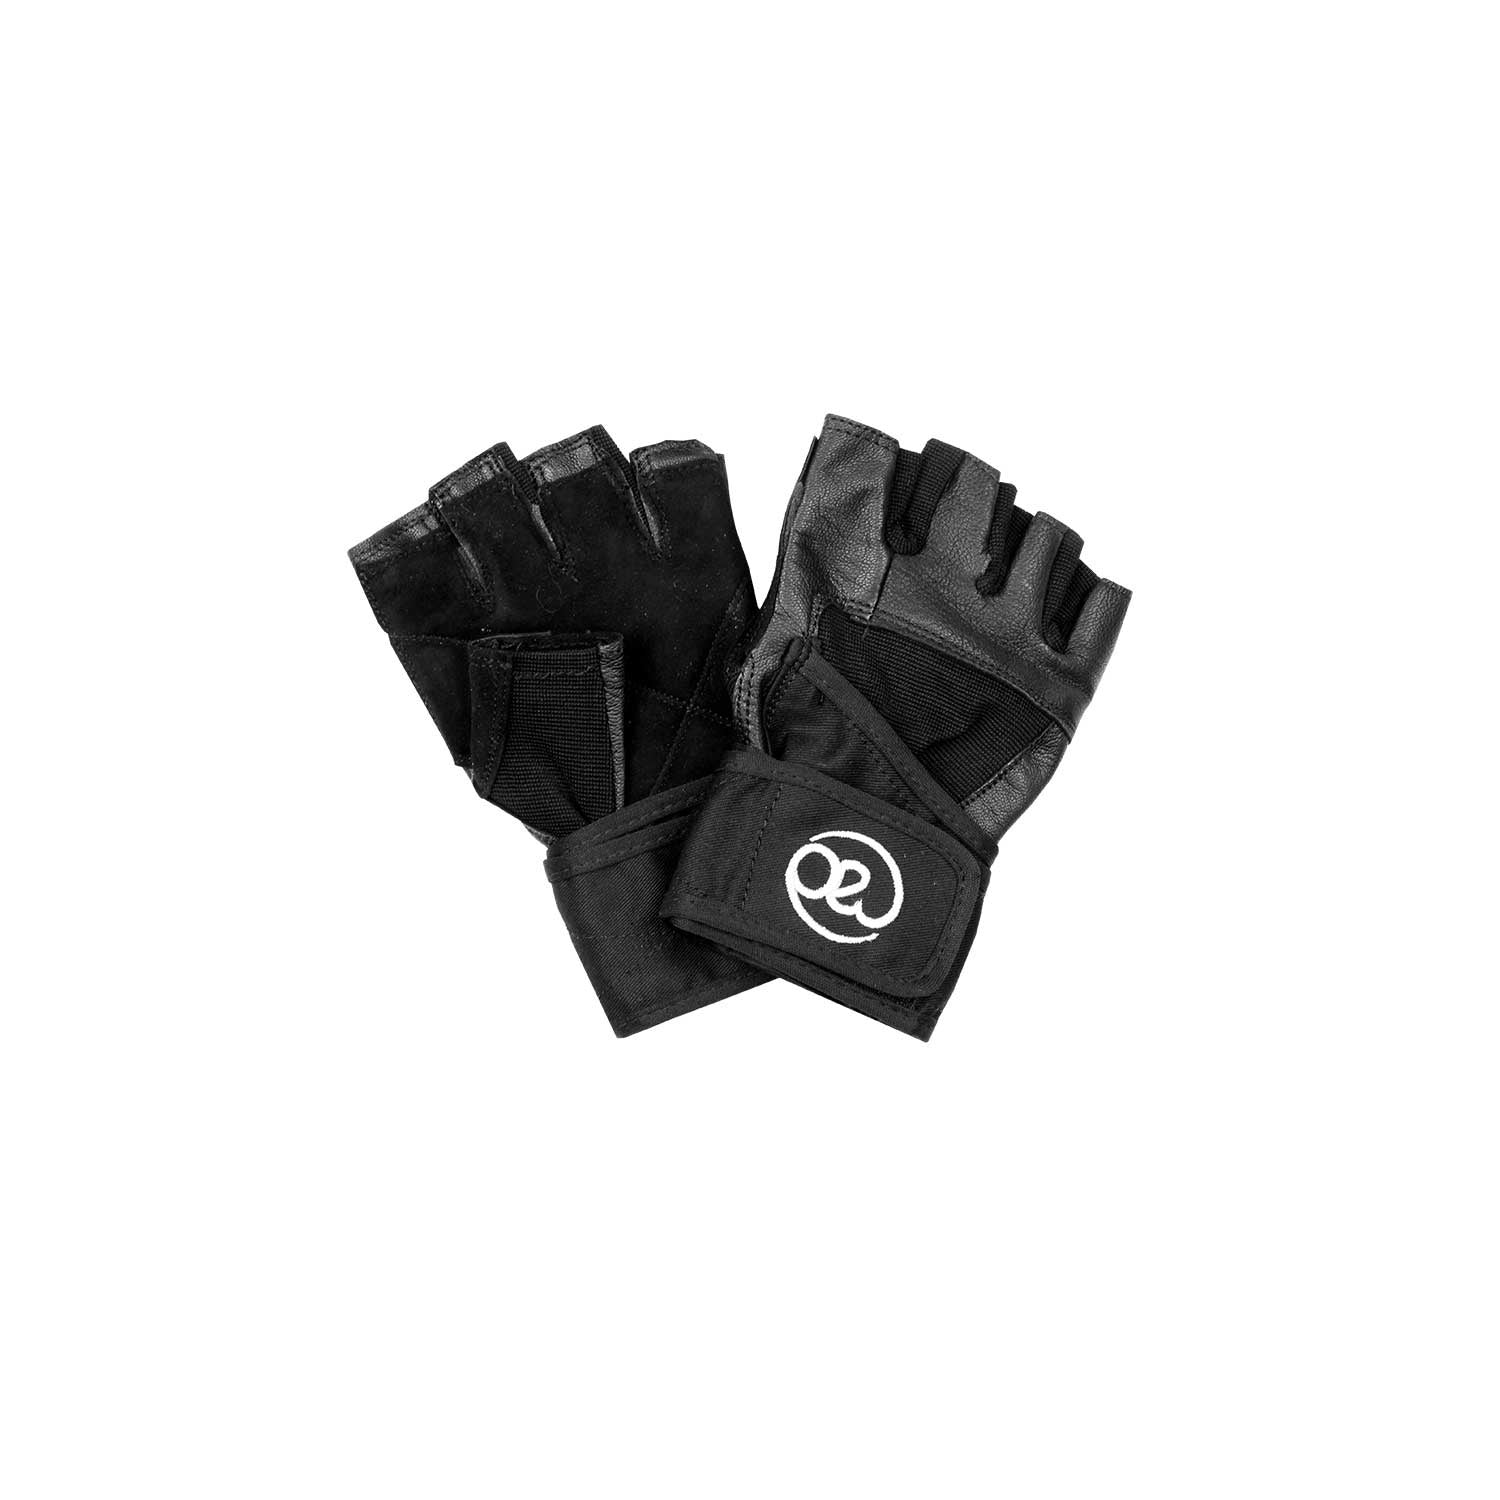 Weight Lifting Gloves With Wrist Wrap